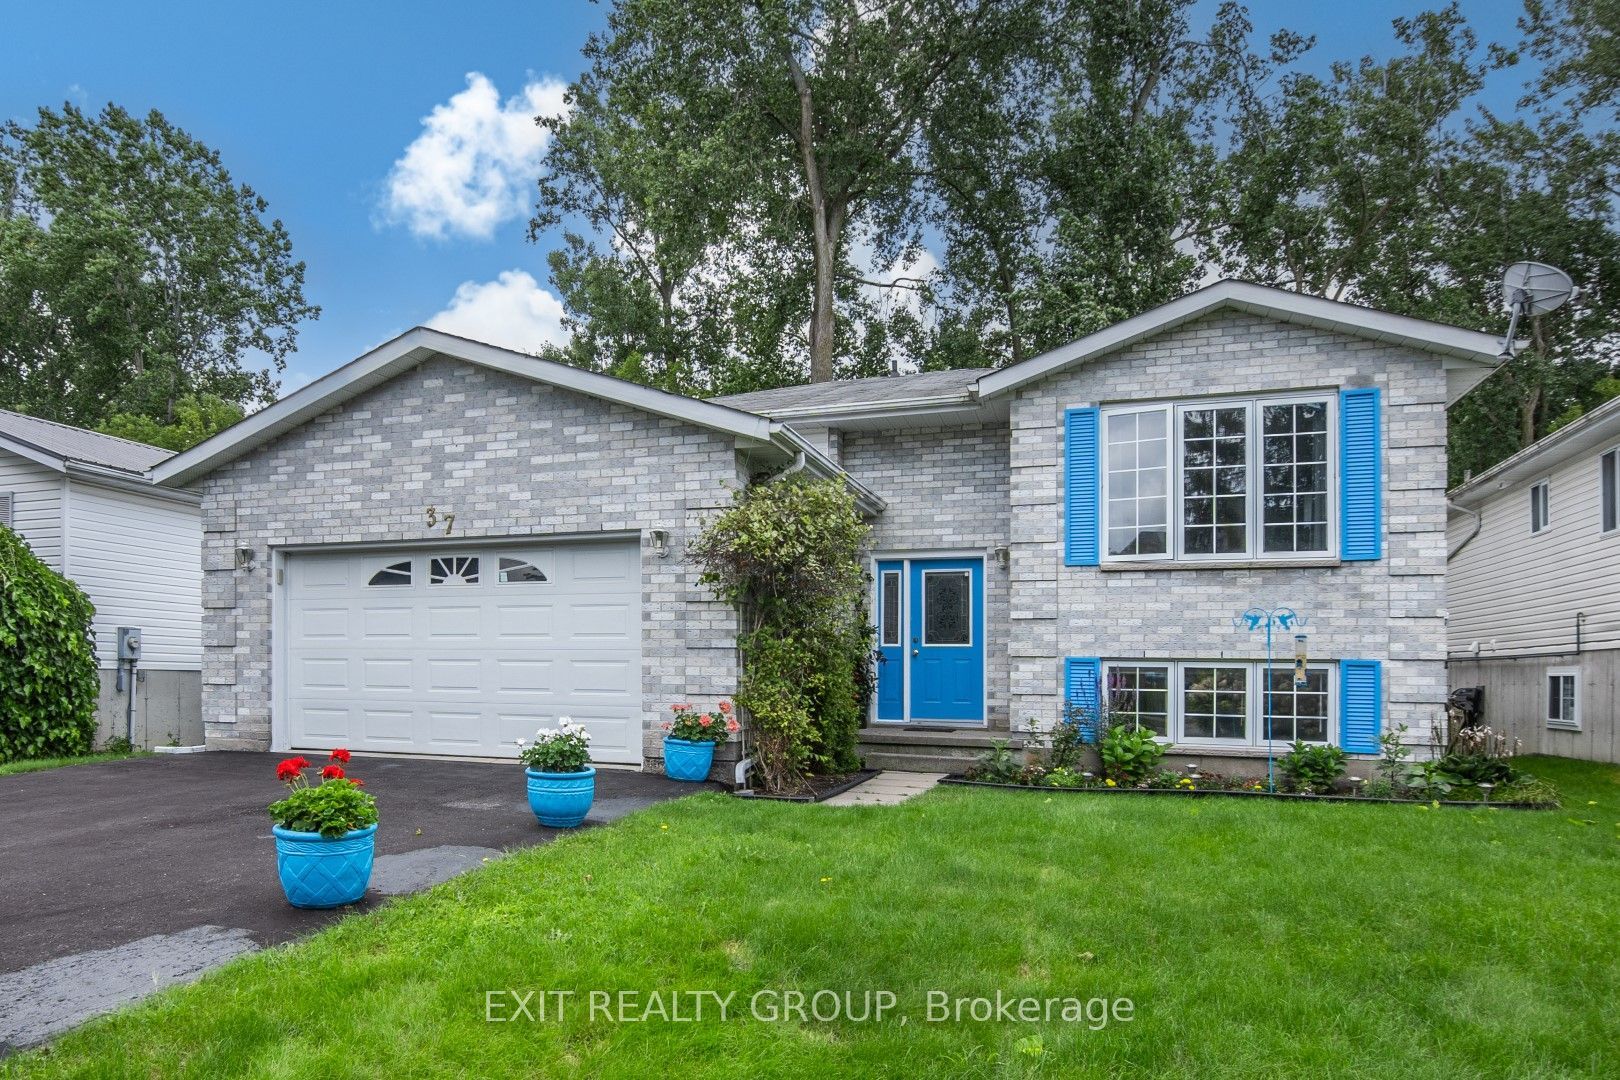 I have sold a property at 37 Briardale BLVD in Quinte West
